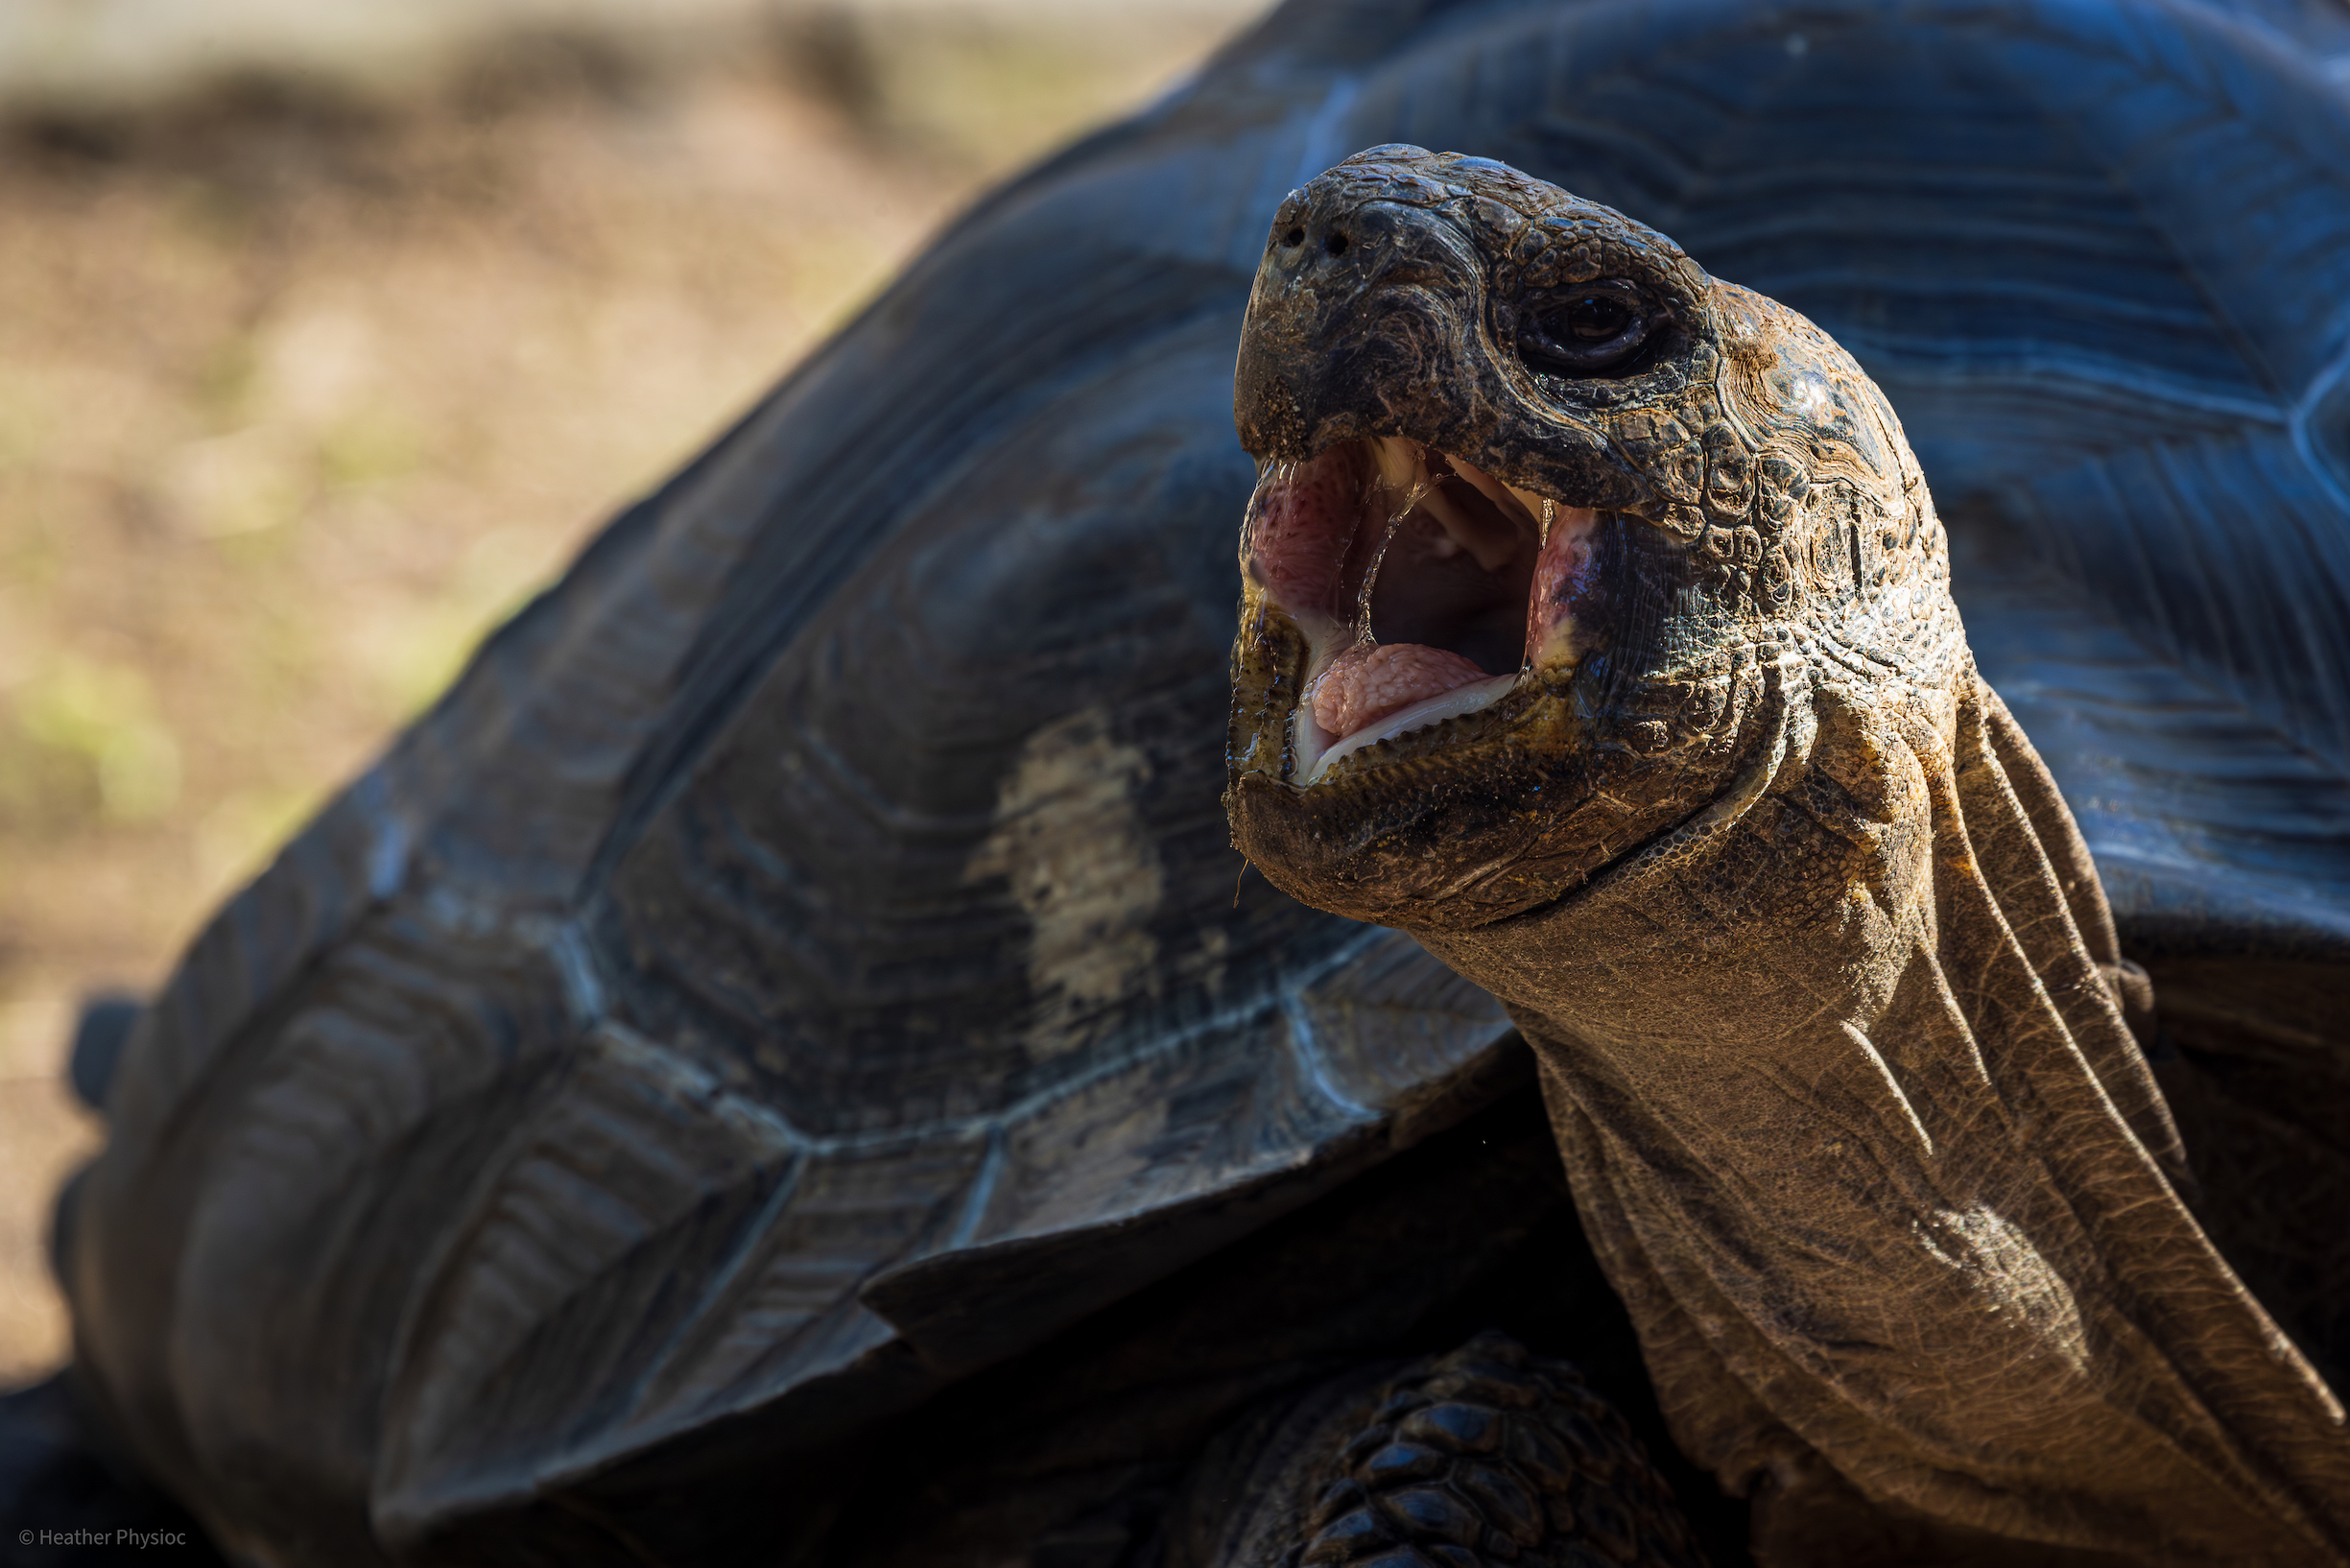 Open-mouthed giant Galápagos Tortoise at the San Diego Zoo